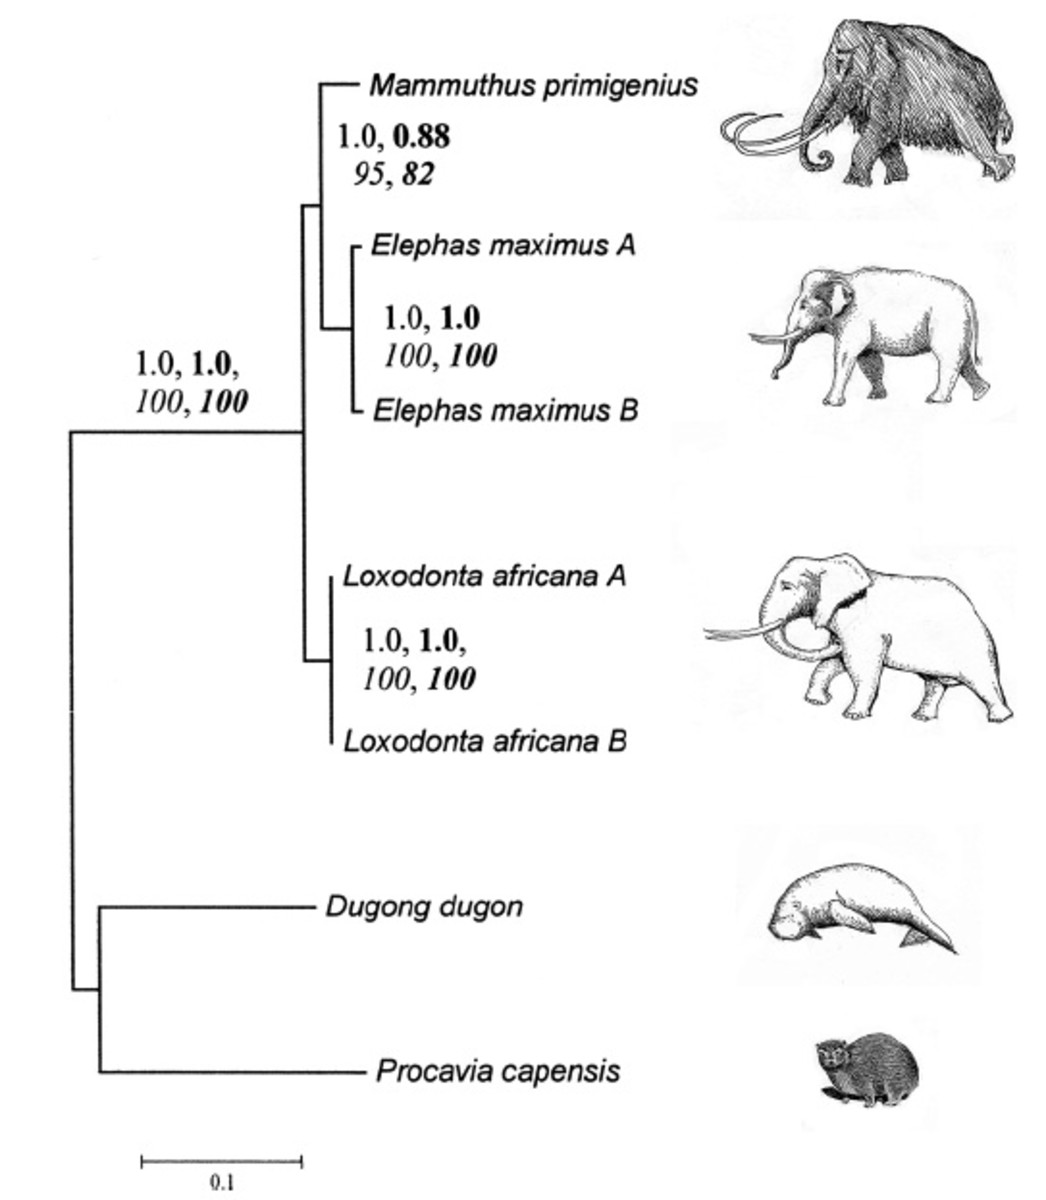 black and white line drawing of a Diagram of the Relationship Between the Dugong and the Elephant